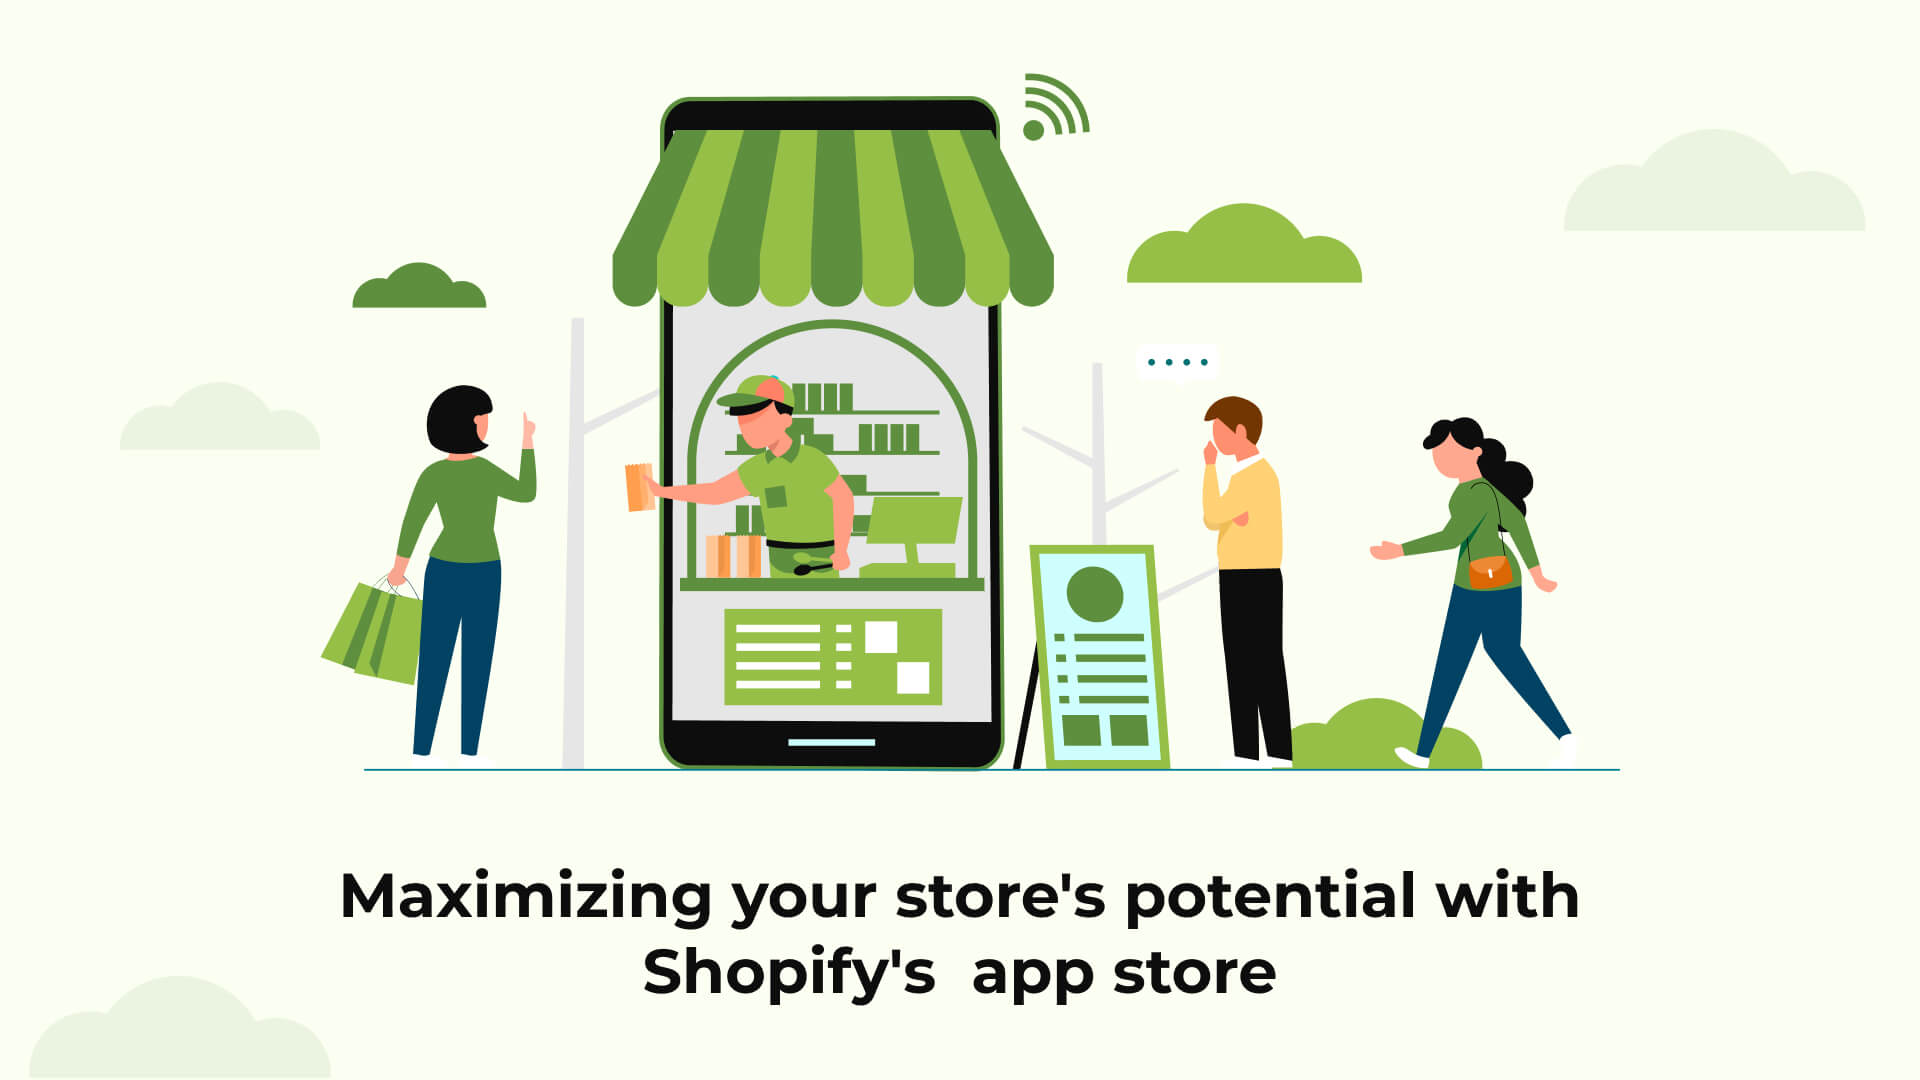 Maximizing your store’s potential with Shopify’s app store